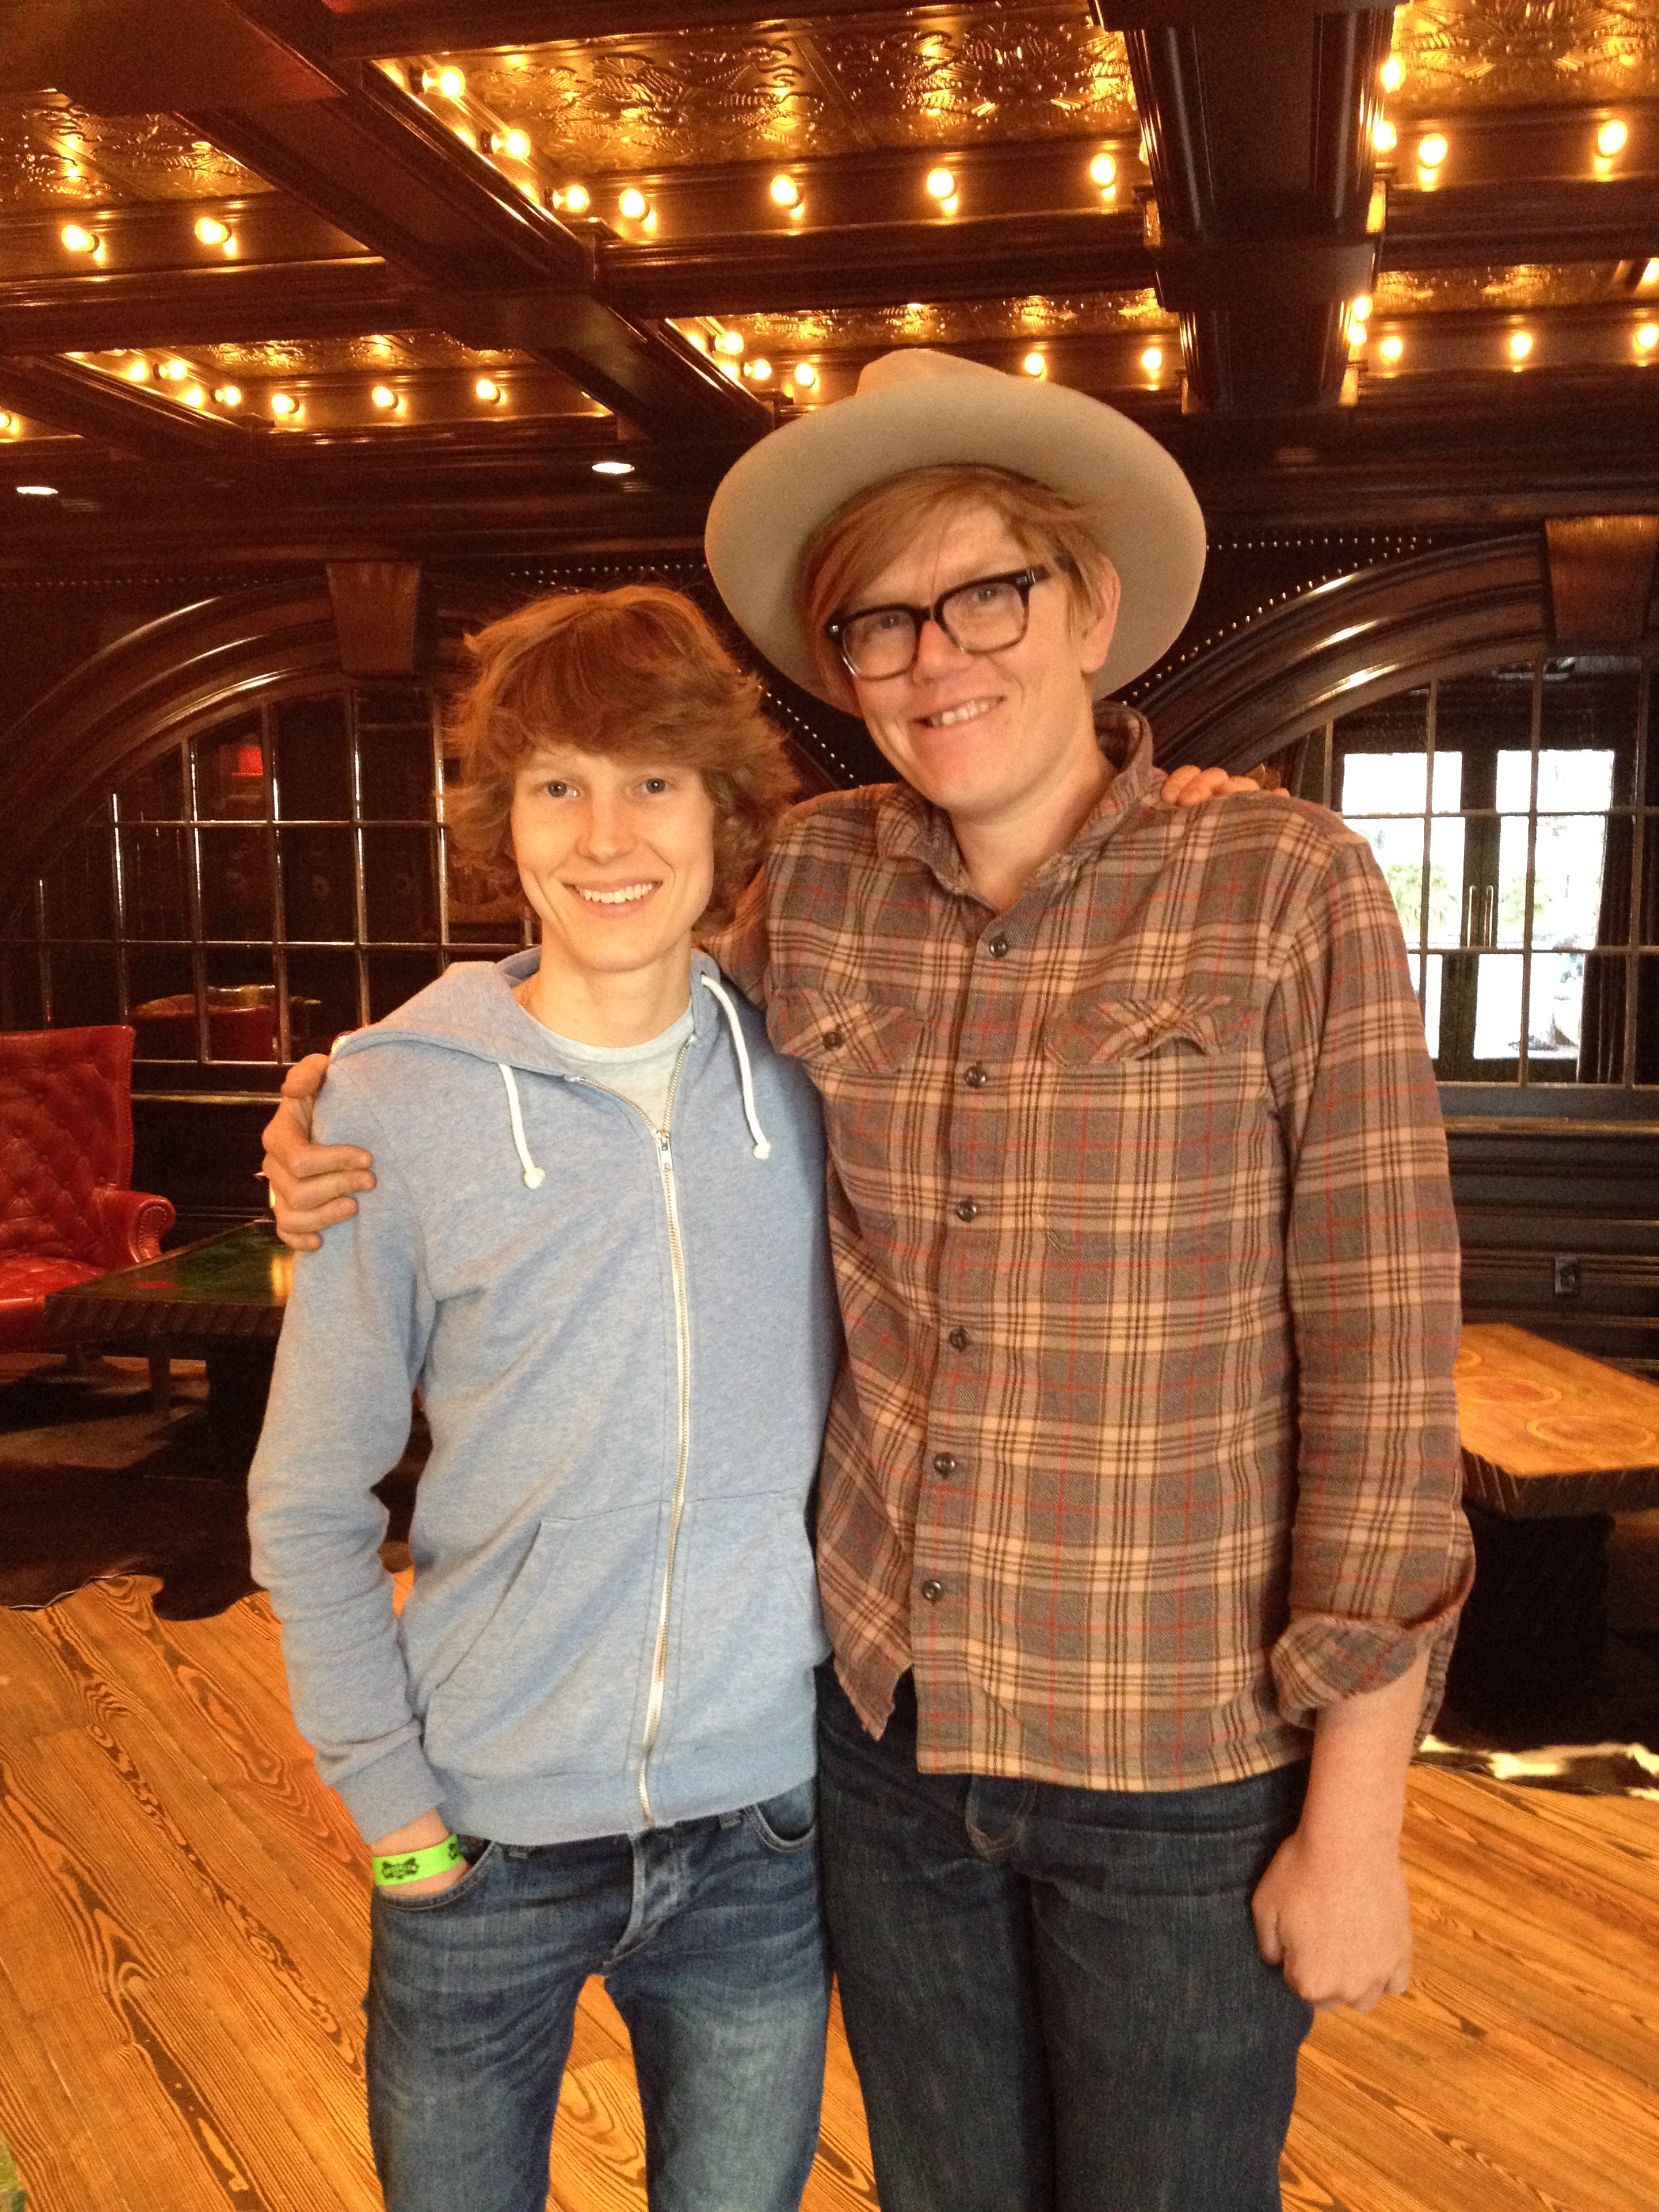 The most recent visit with my biggest musical influence Brett Dennen. At the Brooklyn Bowl in Las Vegas.